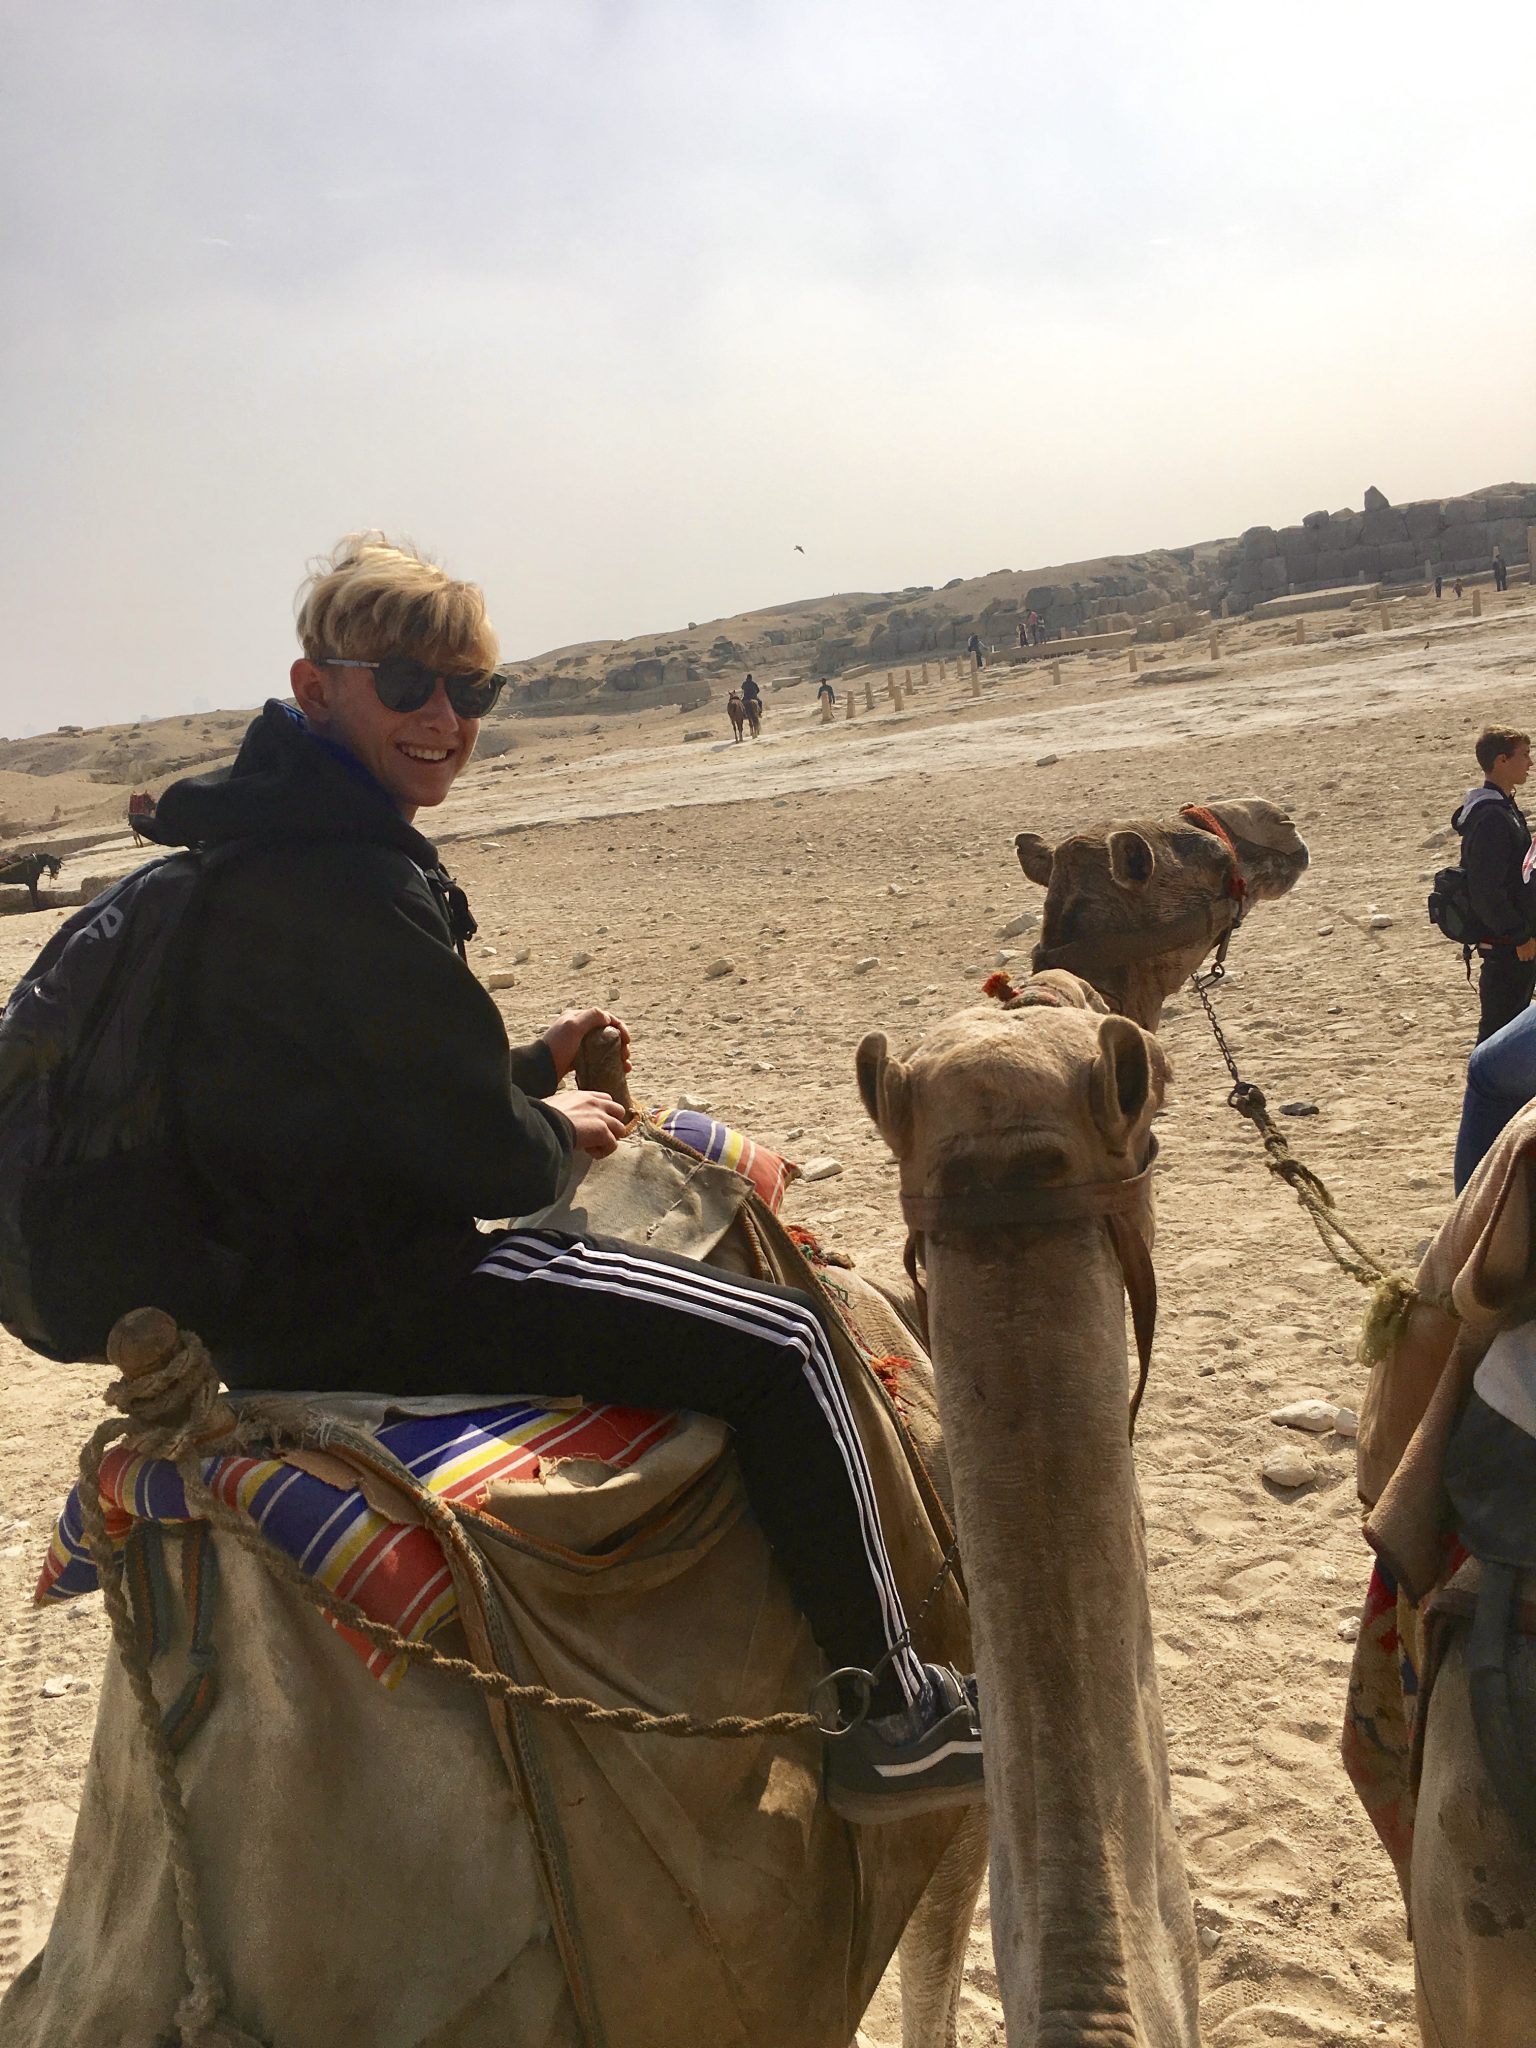 pyramids of giza on camels in cairo